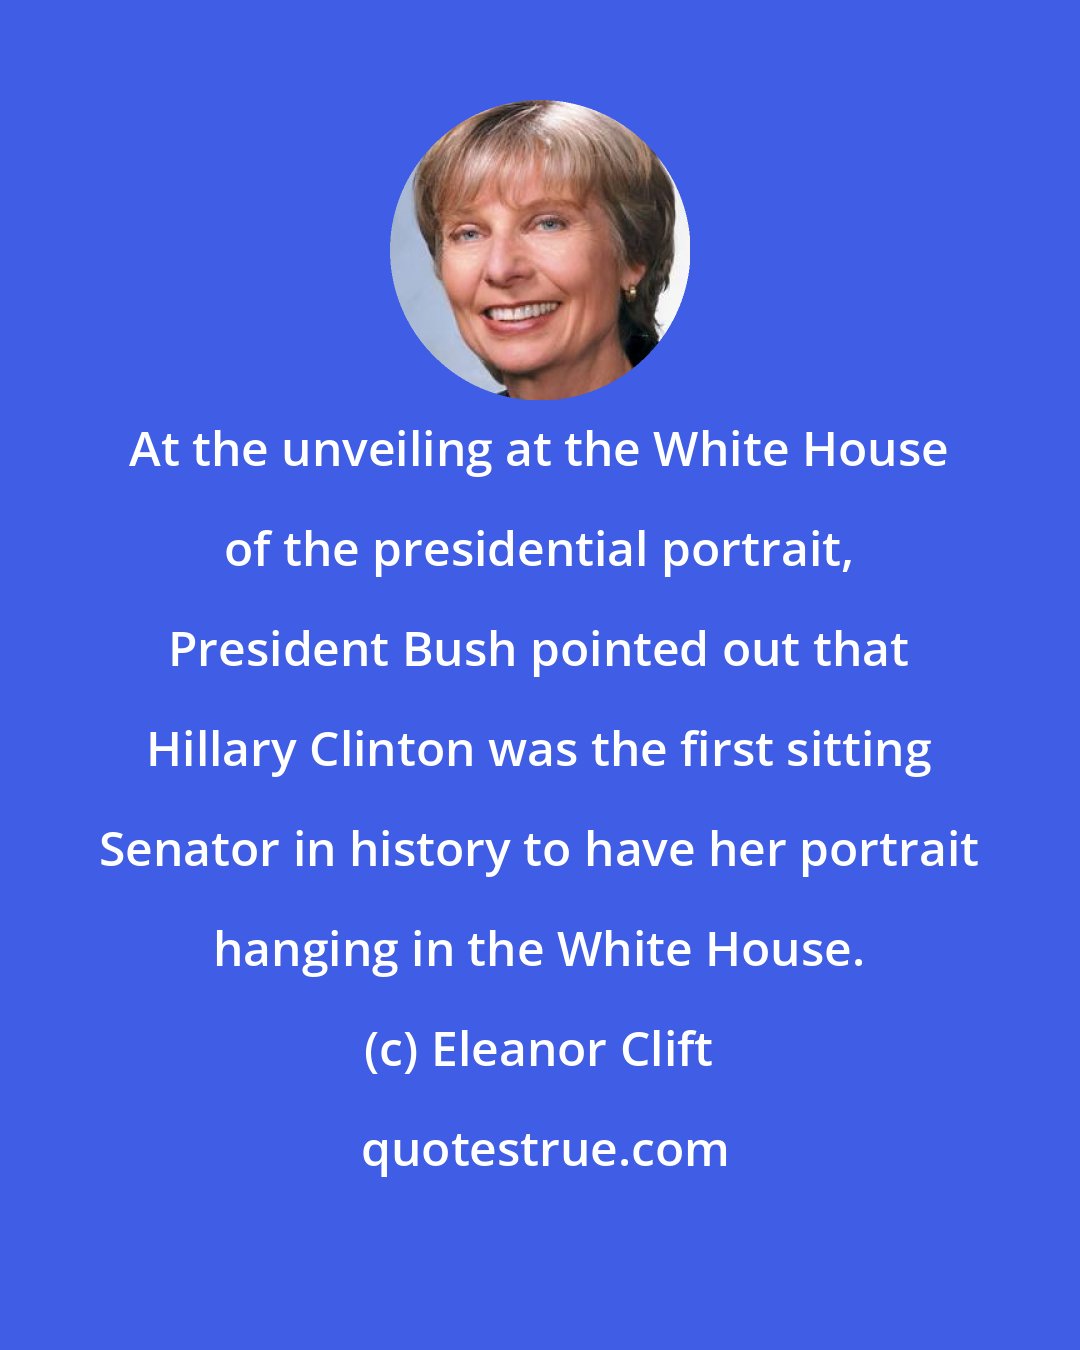 Eleanor Clift: At the unveiling at the White House of the presidential portrait, President Bush pointed out that Hillary Clinton was the first sitting Senator in history to have her portrait hanging in the White House.